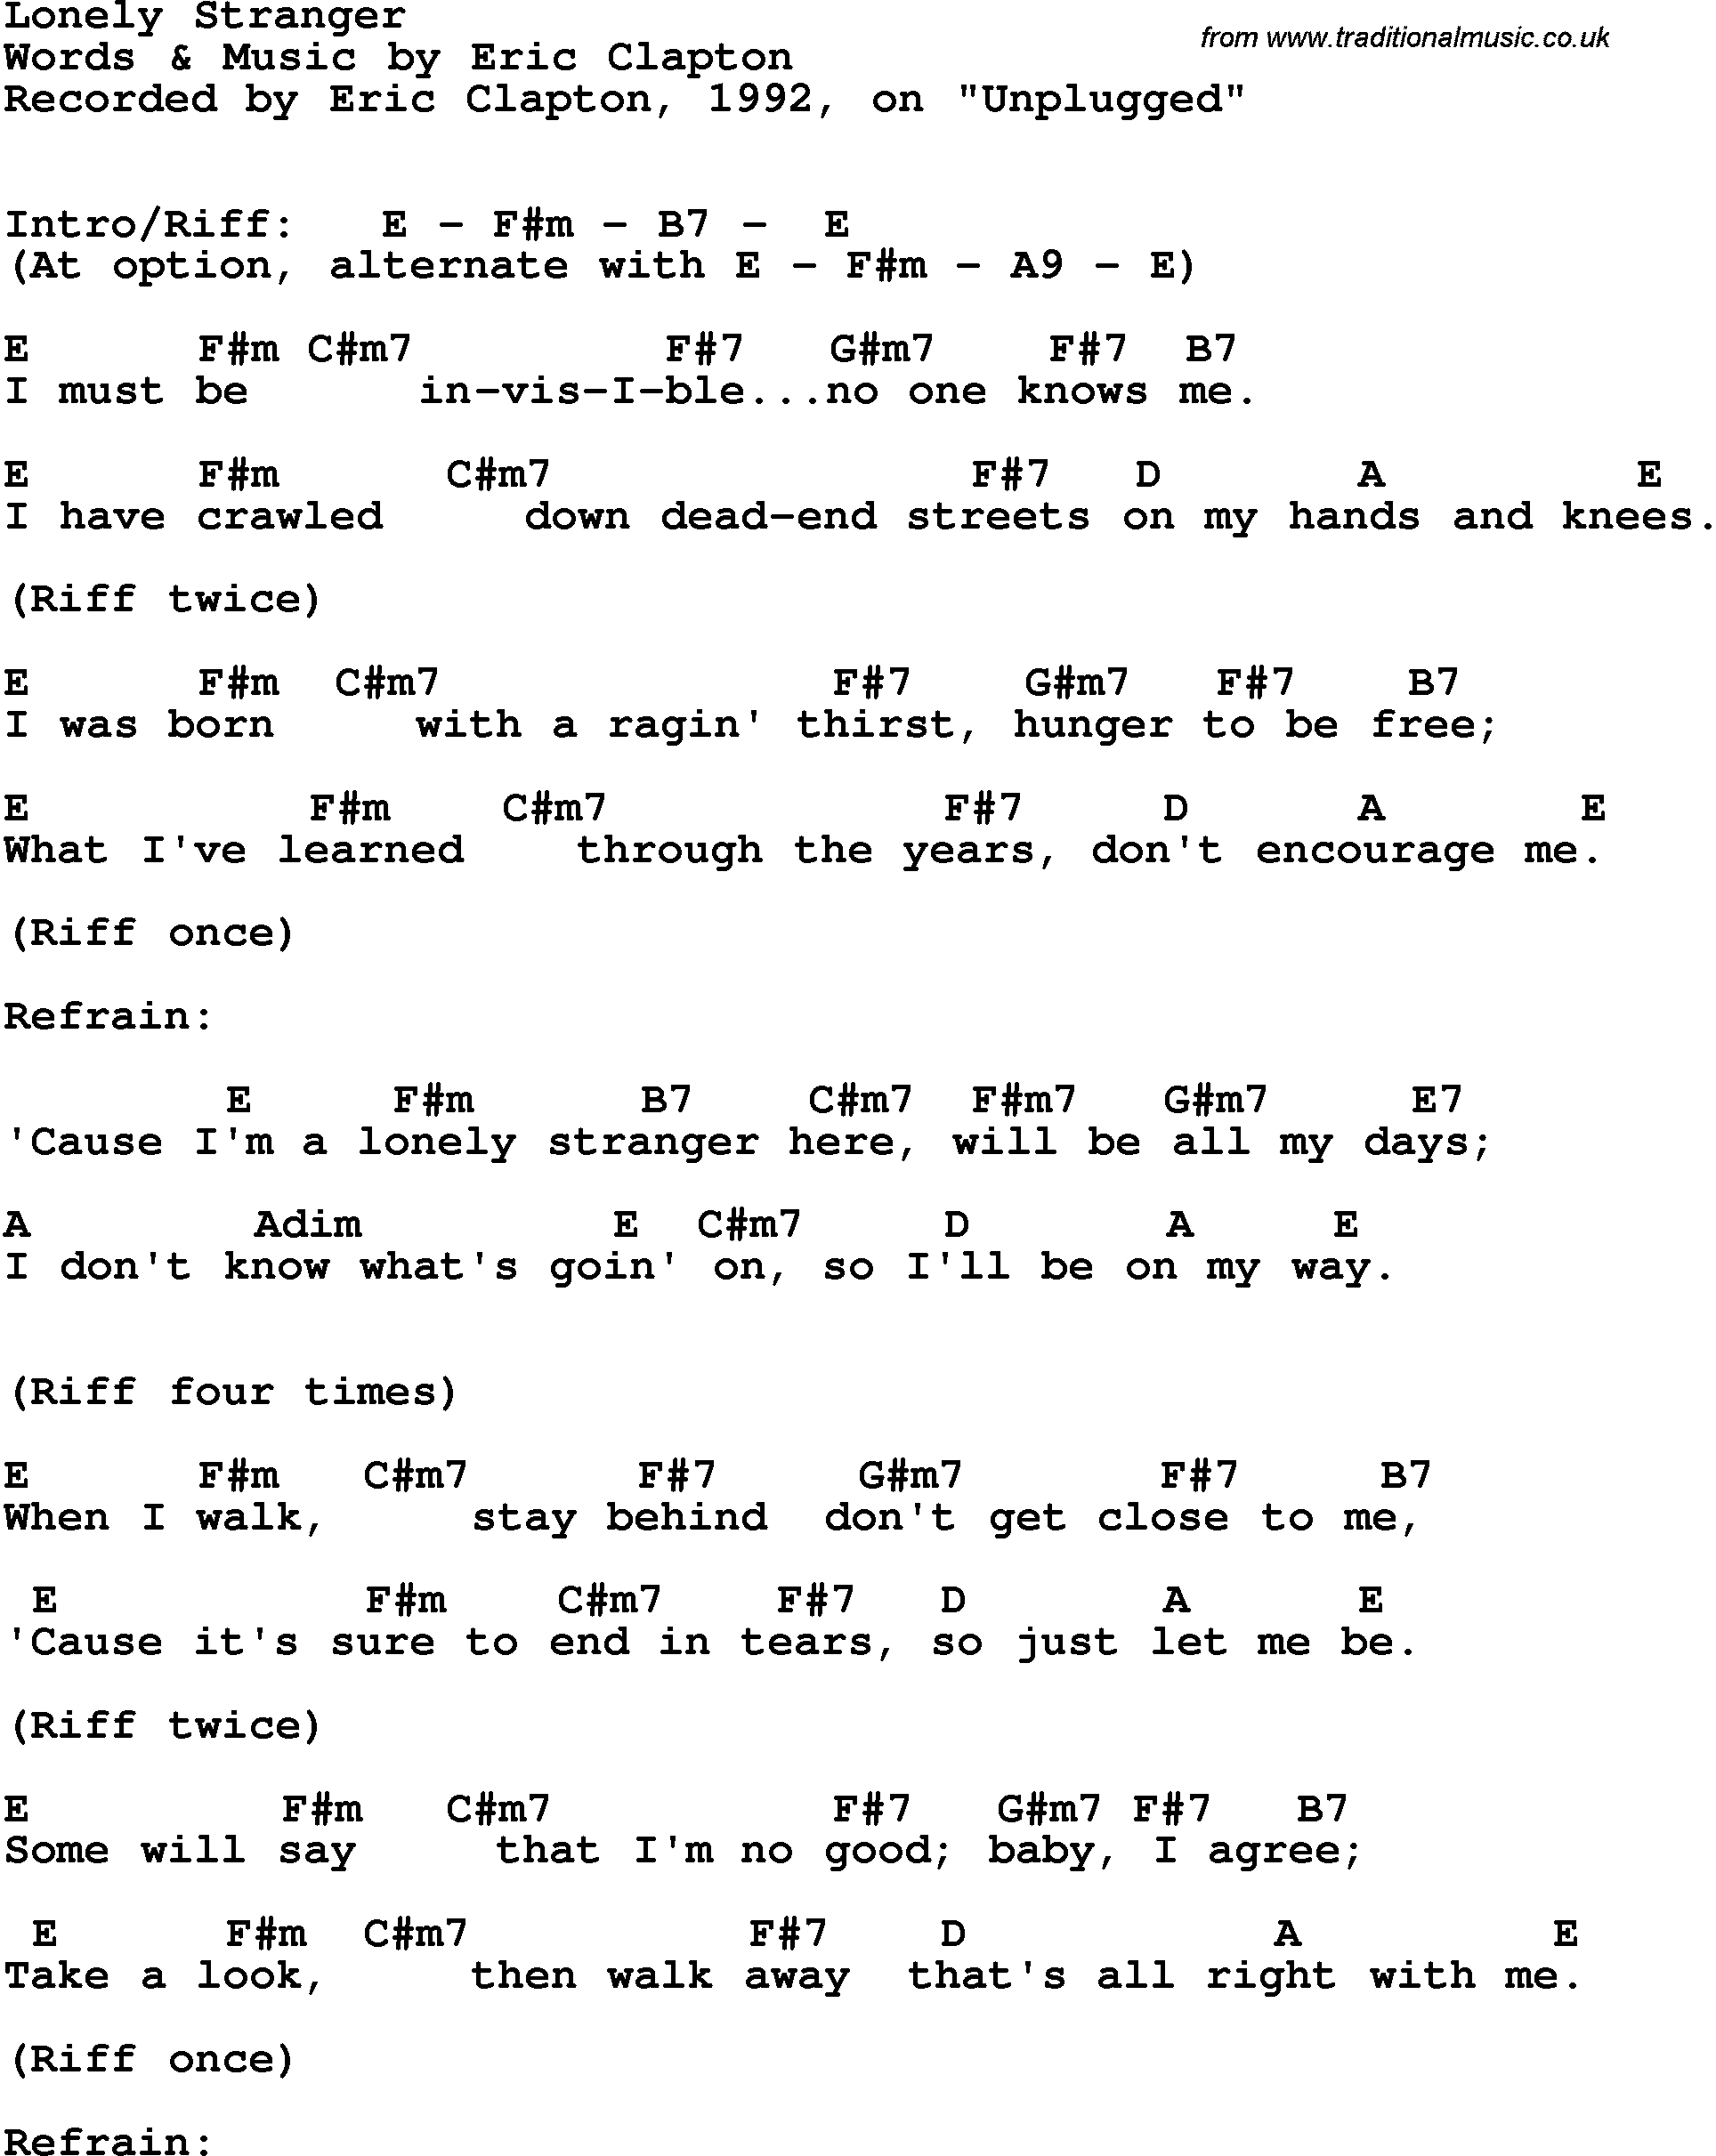 Song Lyrics with guitar chords for Lonely Stranger - Eric Clapton, 1992